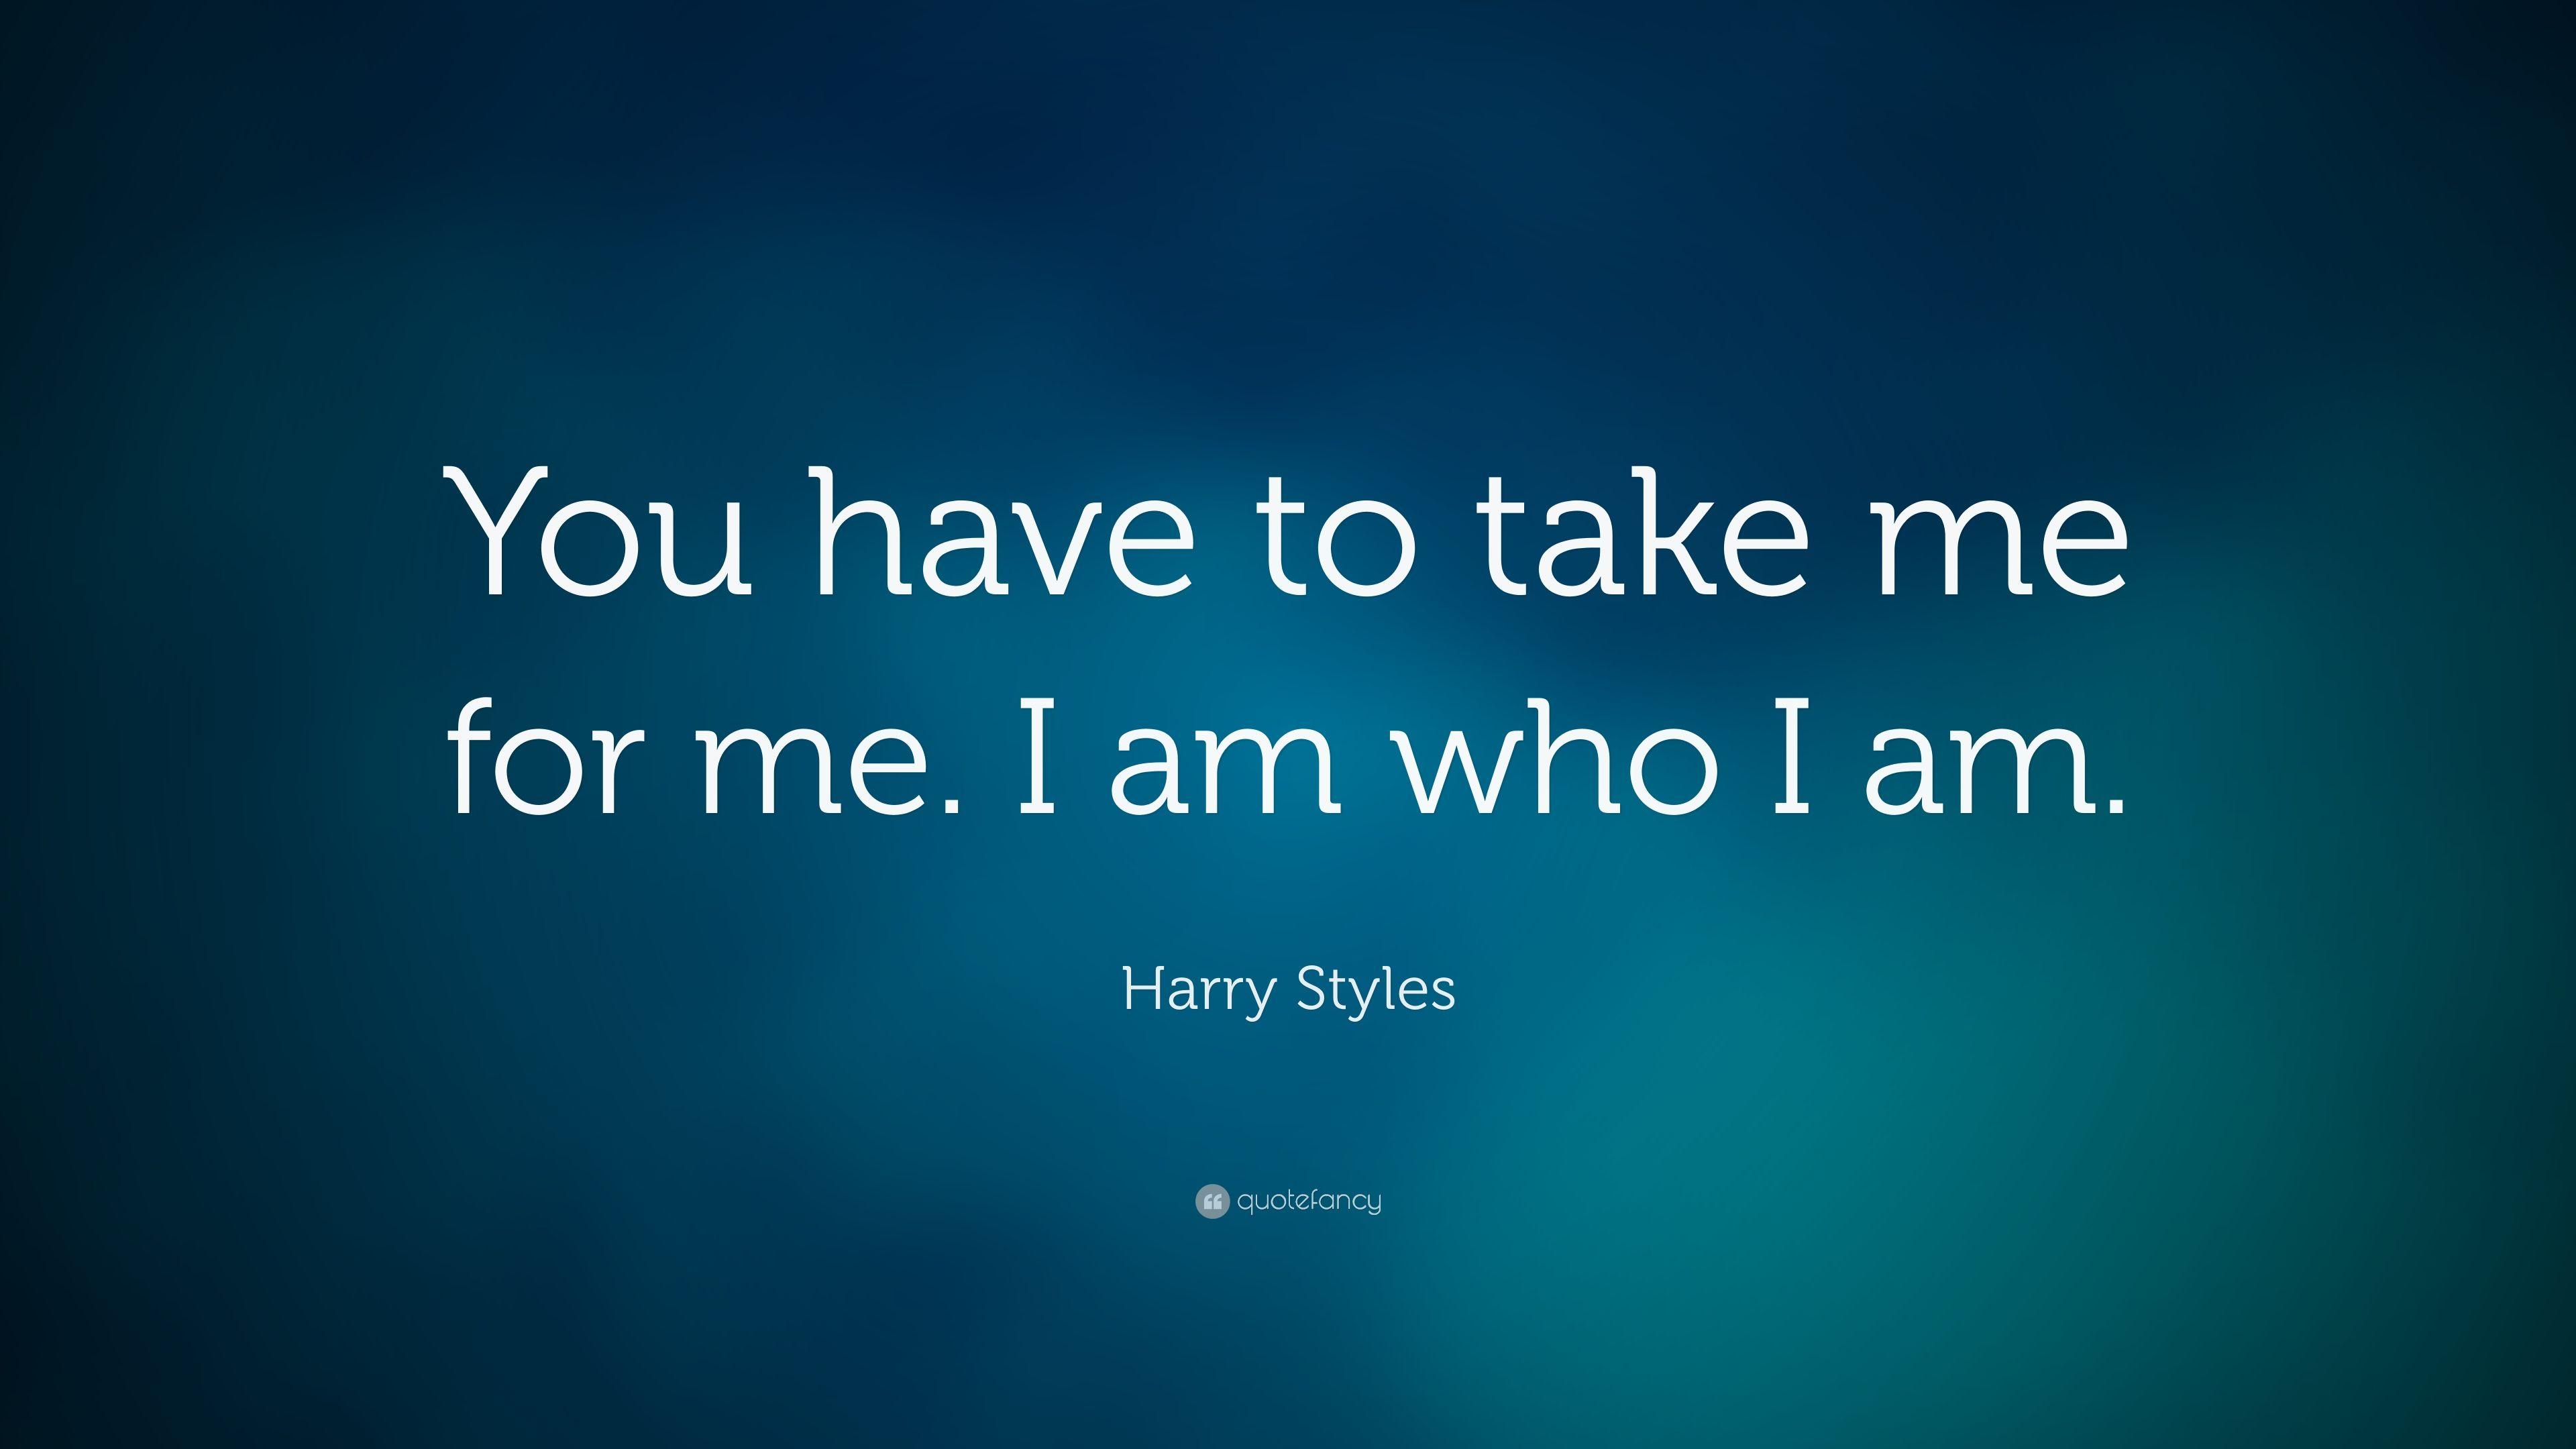 Harry Styles Quotes (62 wallpaper)